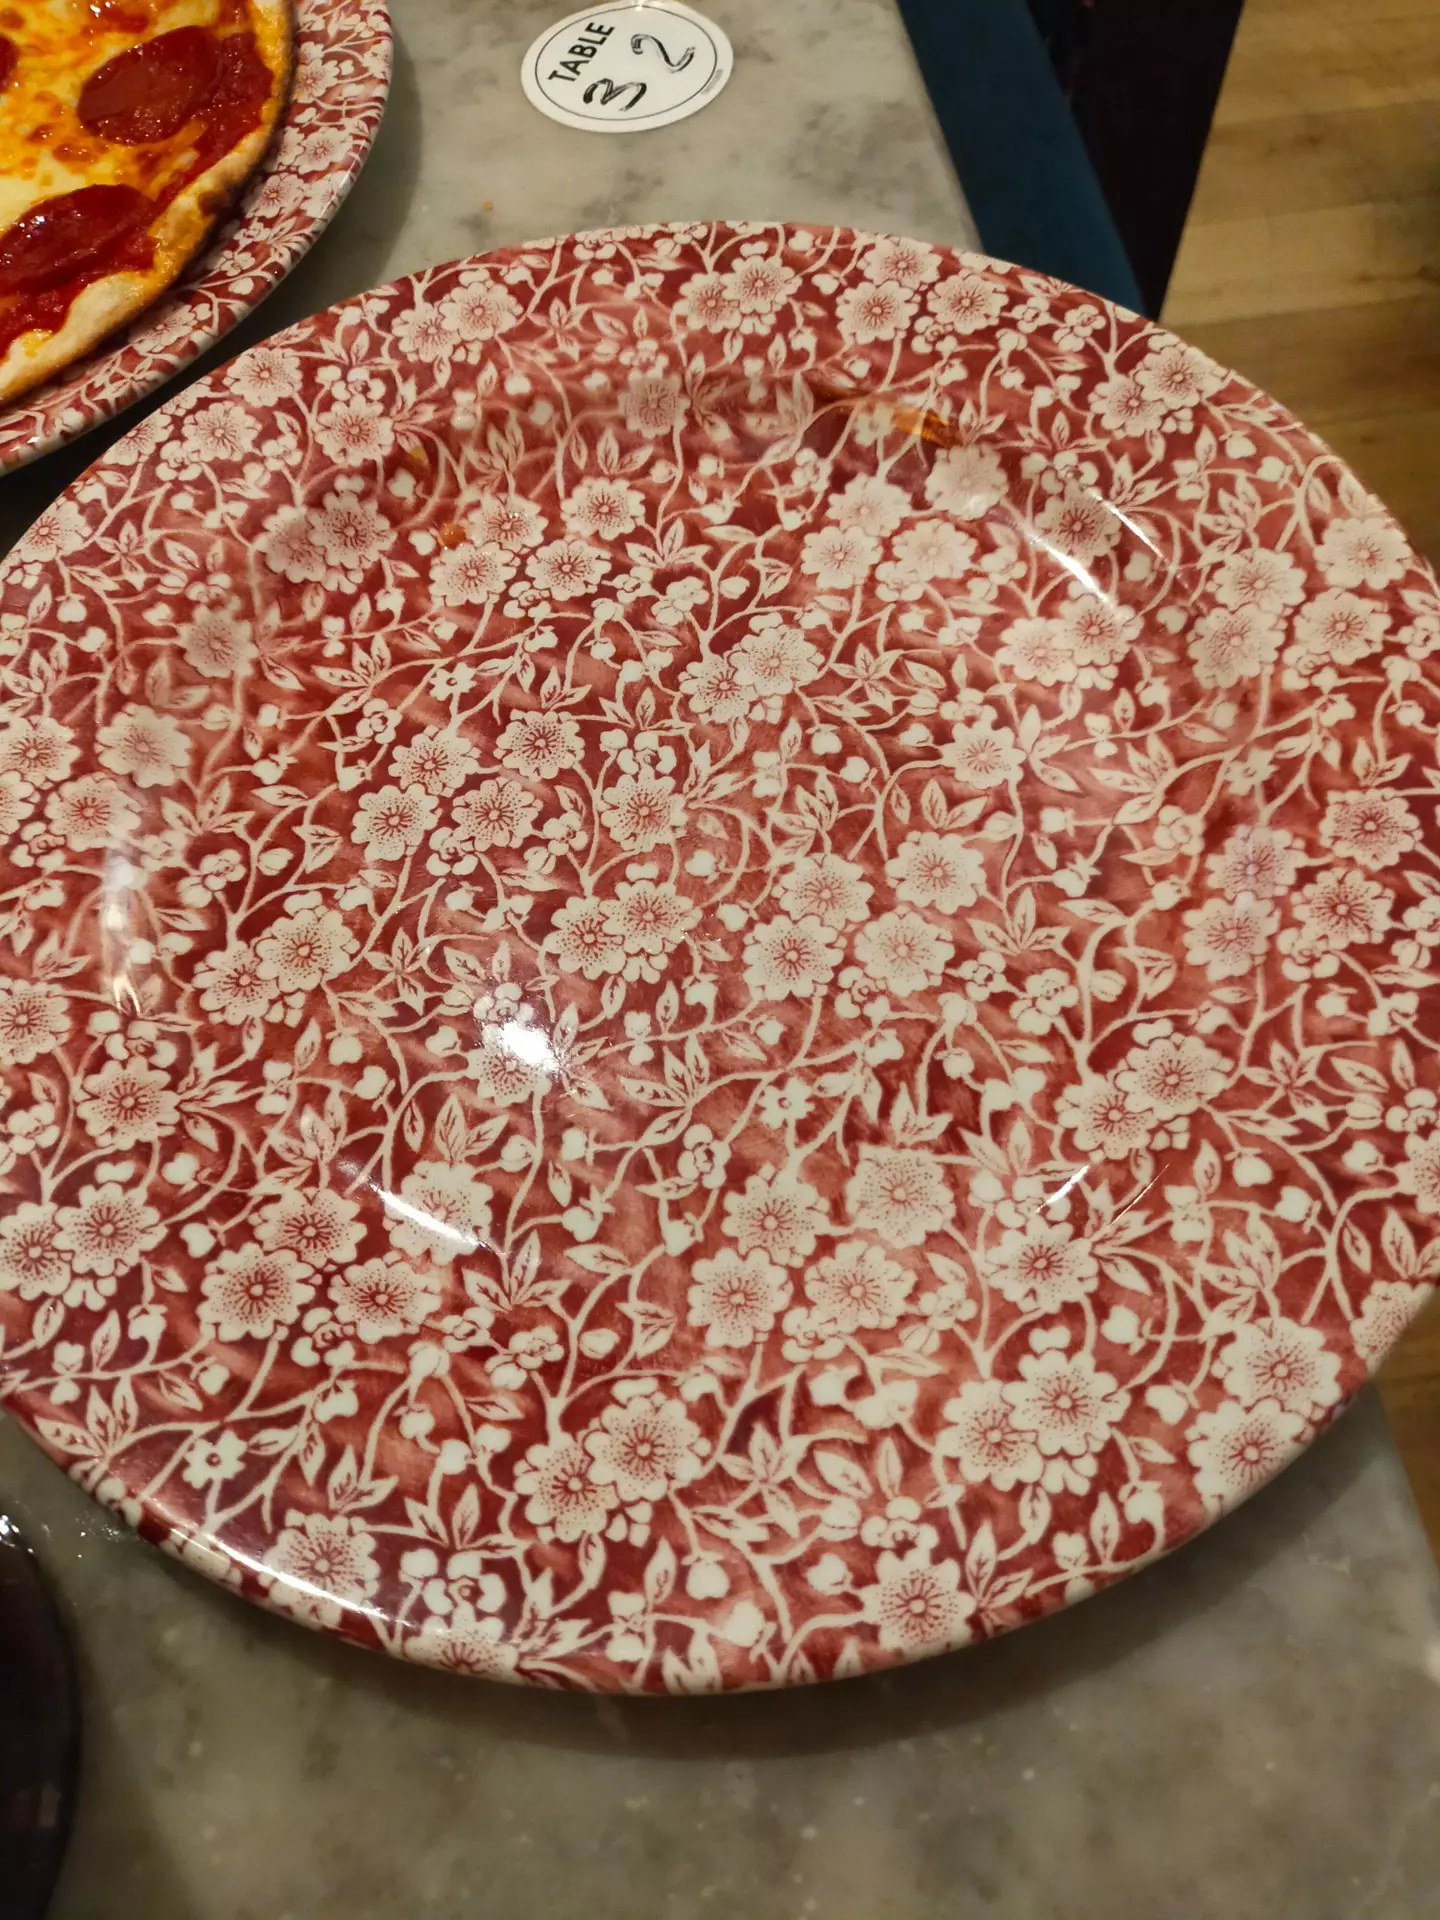 Have you ever seen a red plate in Wetherspoons? (Reddit/u/sven3067)